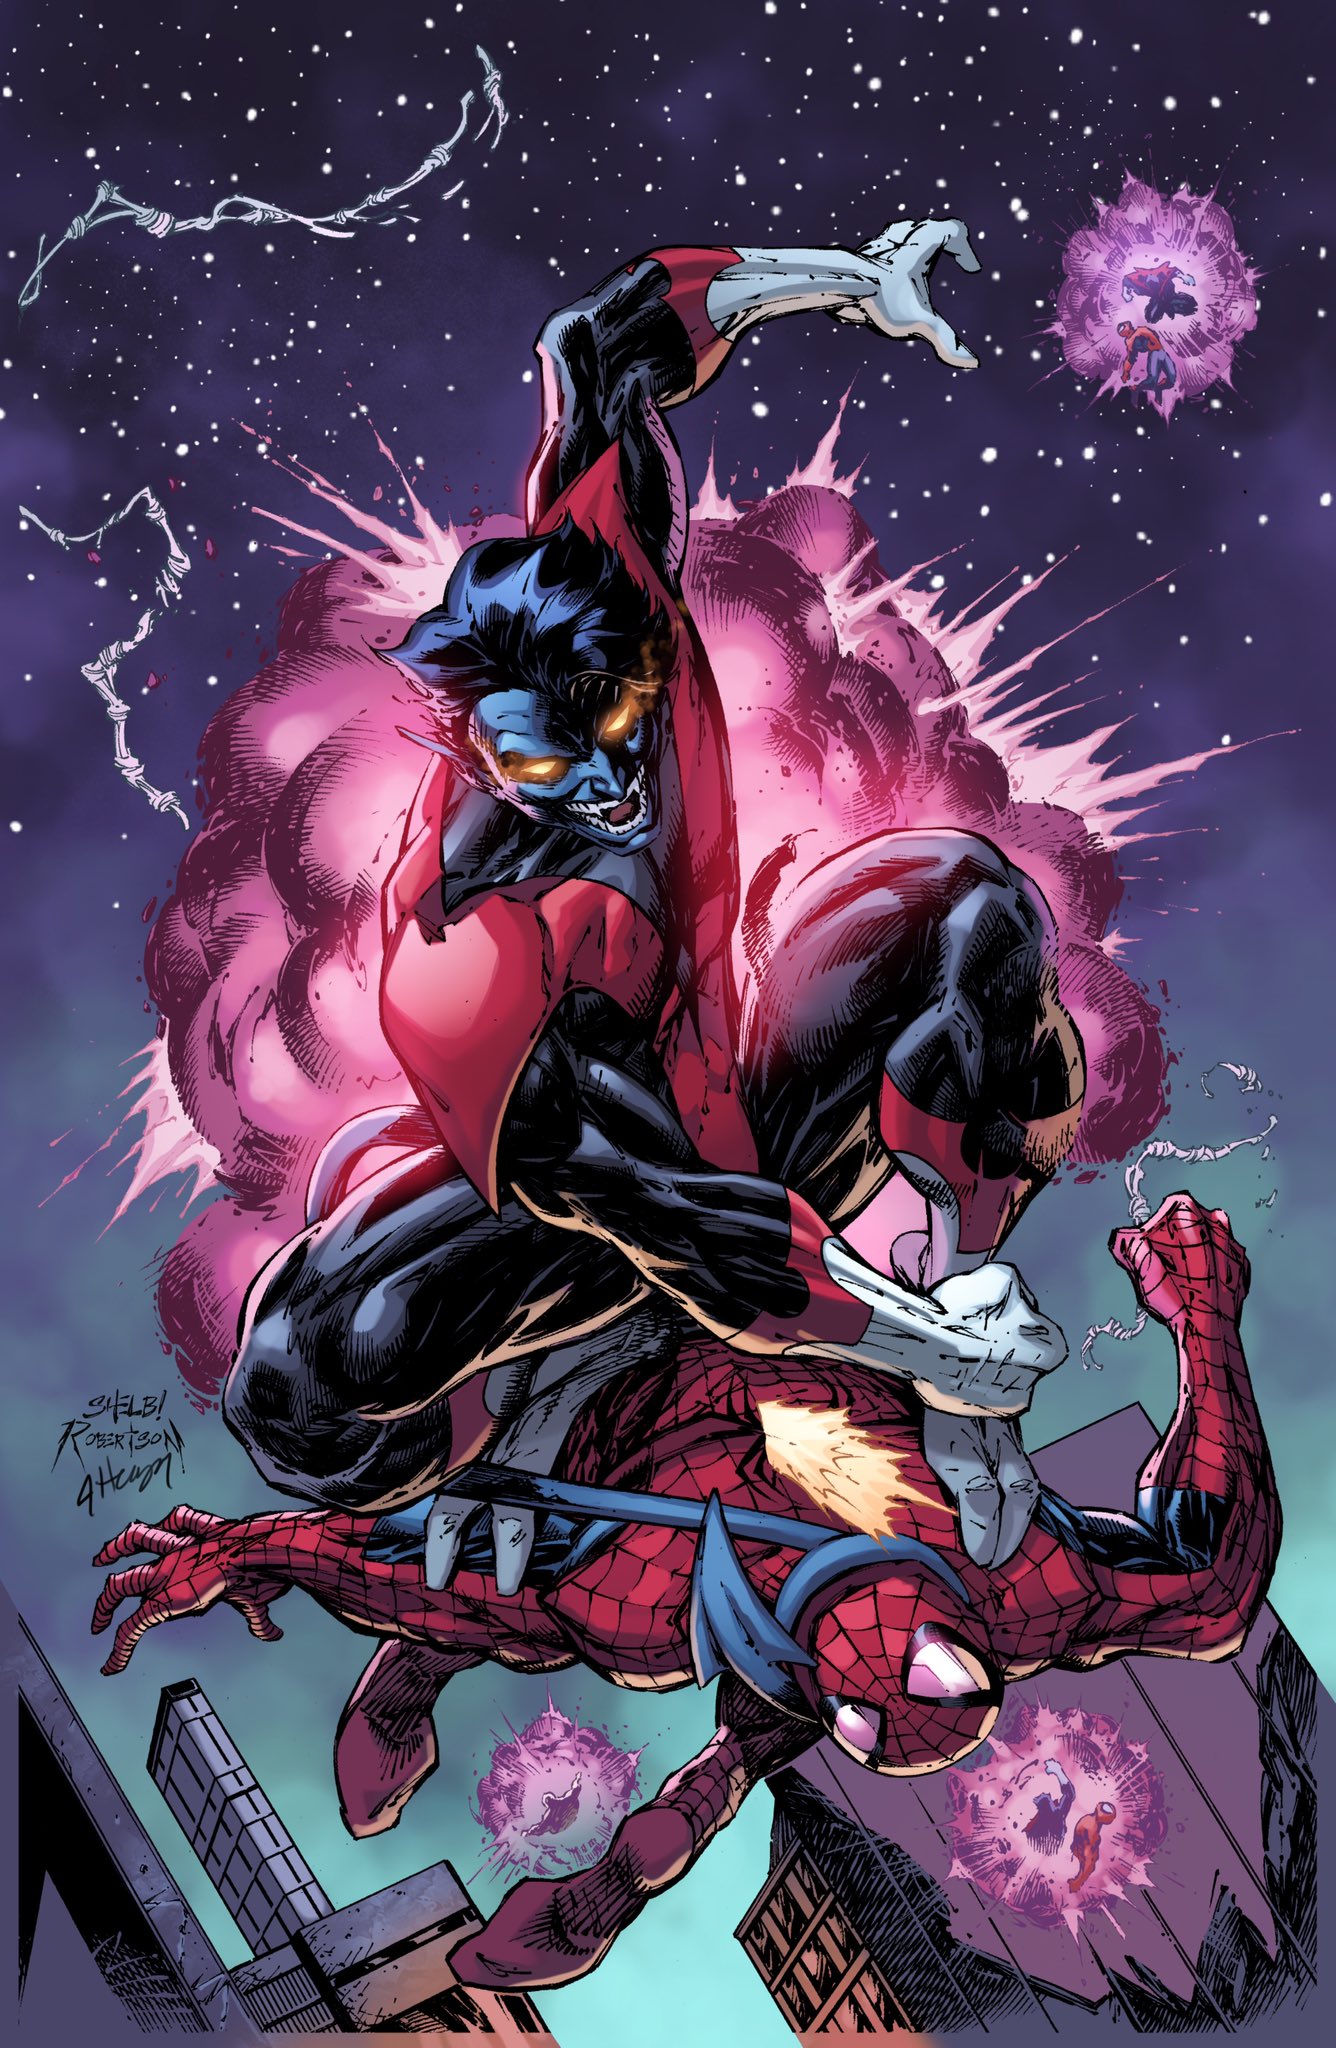 Jesse Heagy on X: Here is some spidey ass beating by Nightcrawler. Enjoy  ;) lines by the awesome @shelbywankenobi and colors by me. Thanks Phil R.  On the commission. #marvel #spiderman #nightcrawler #